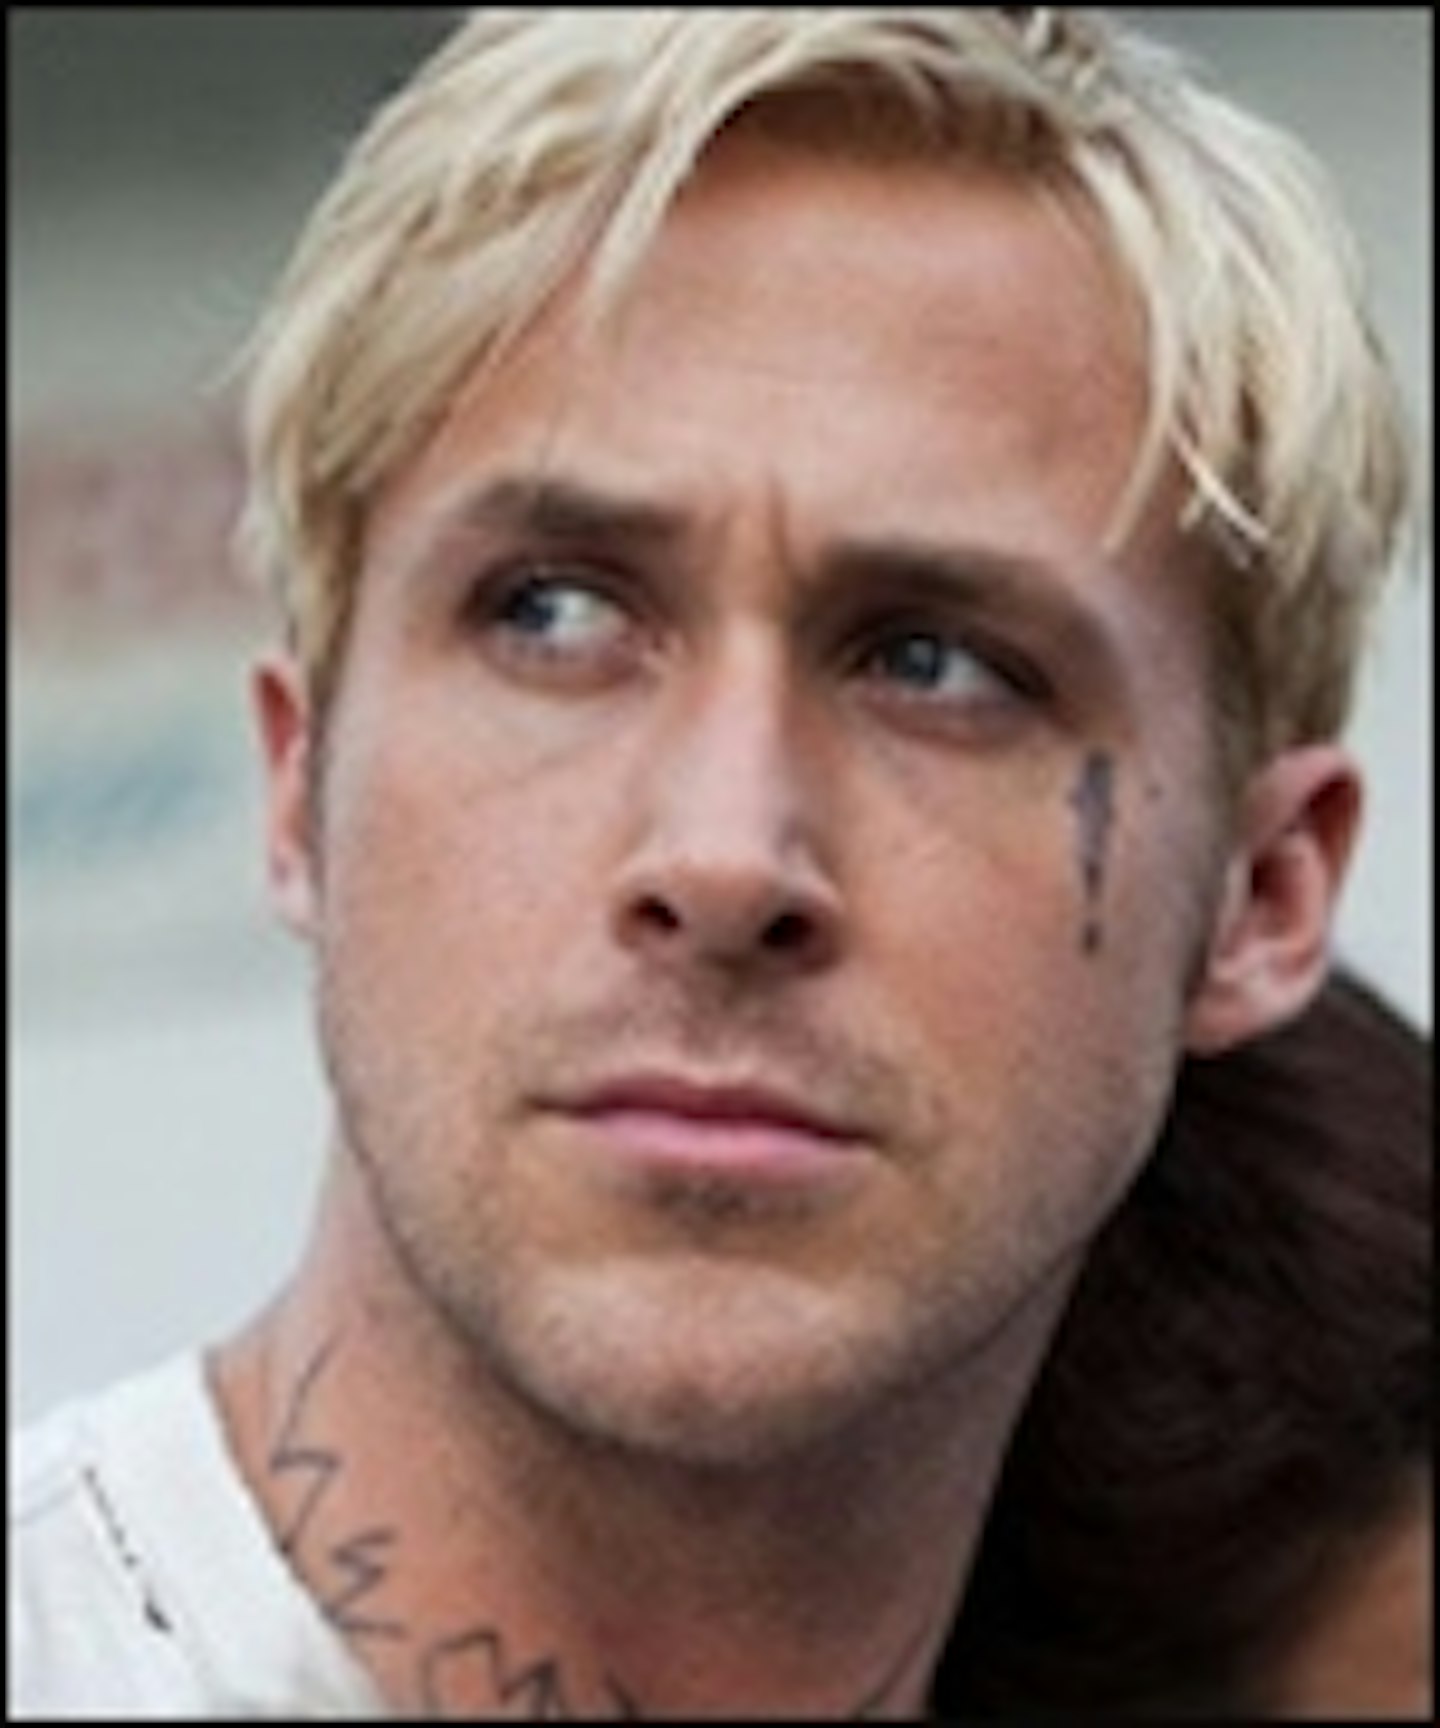 9 The Place Beyond The Pines Stills Land